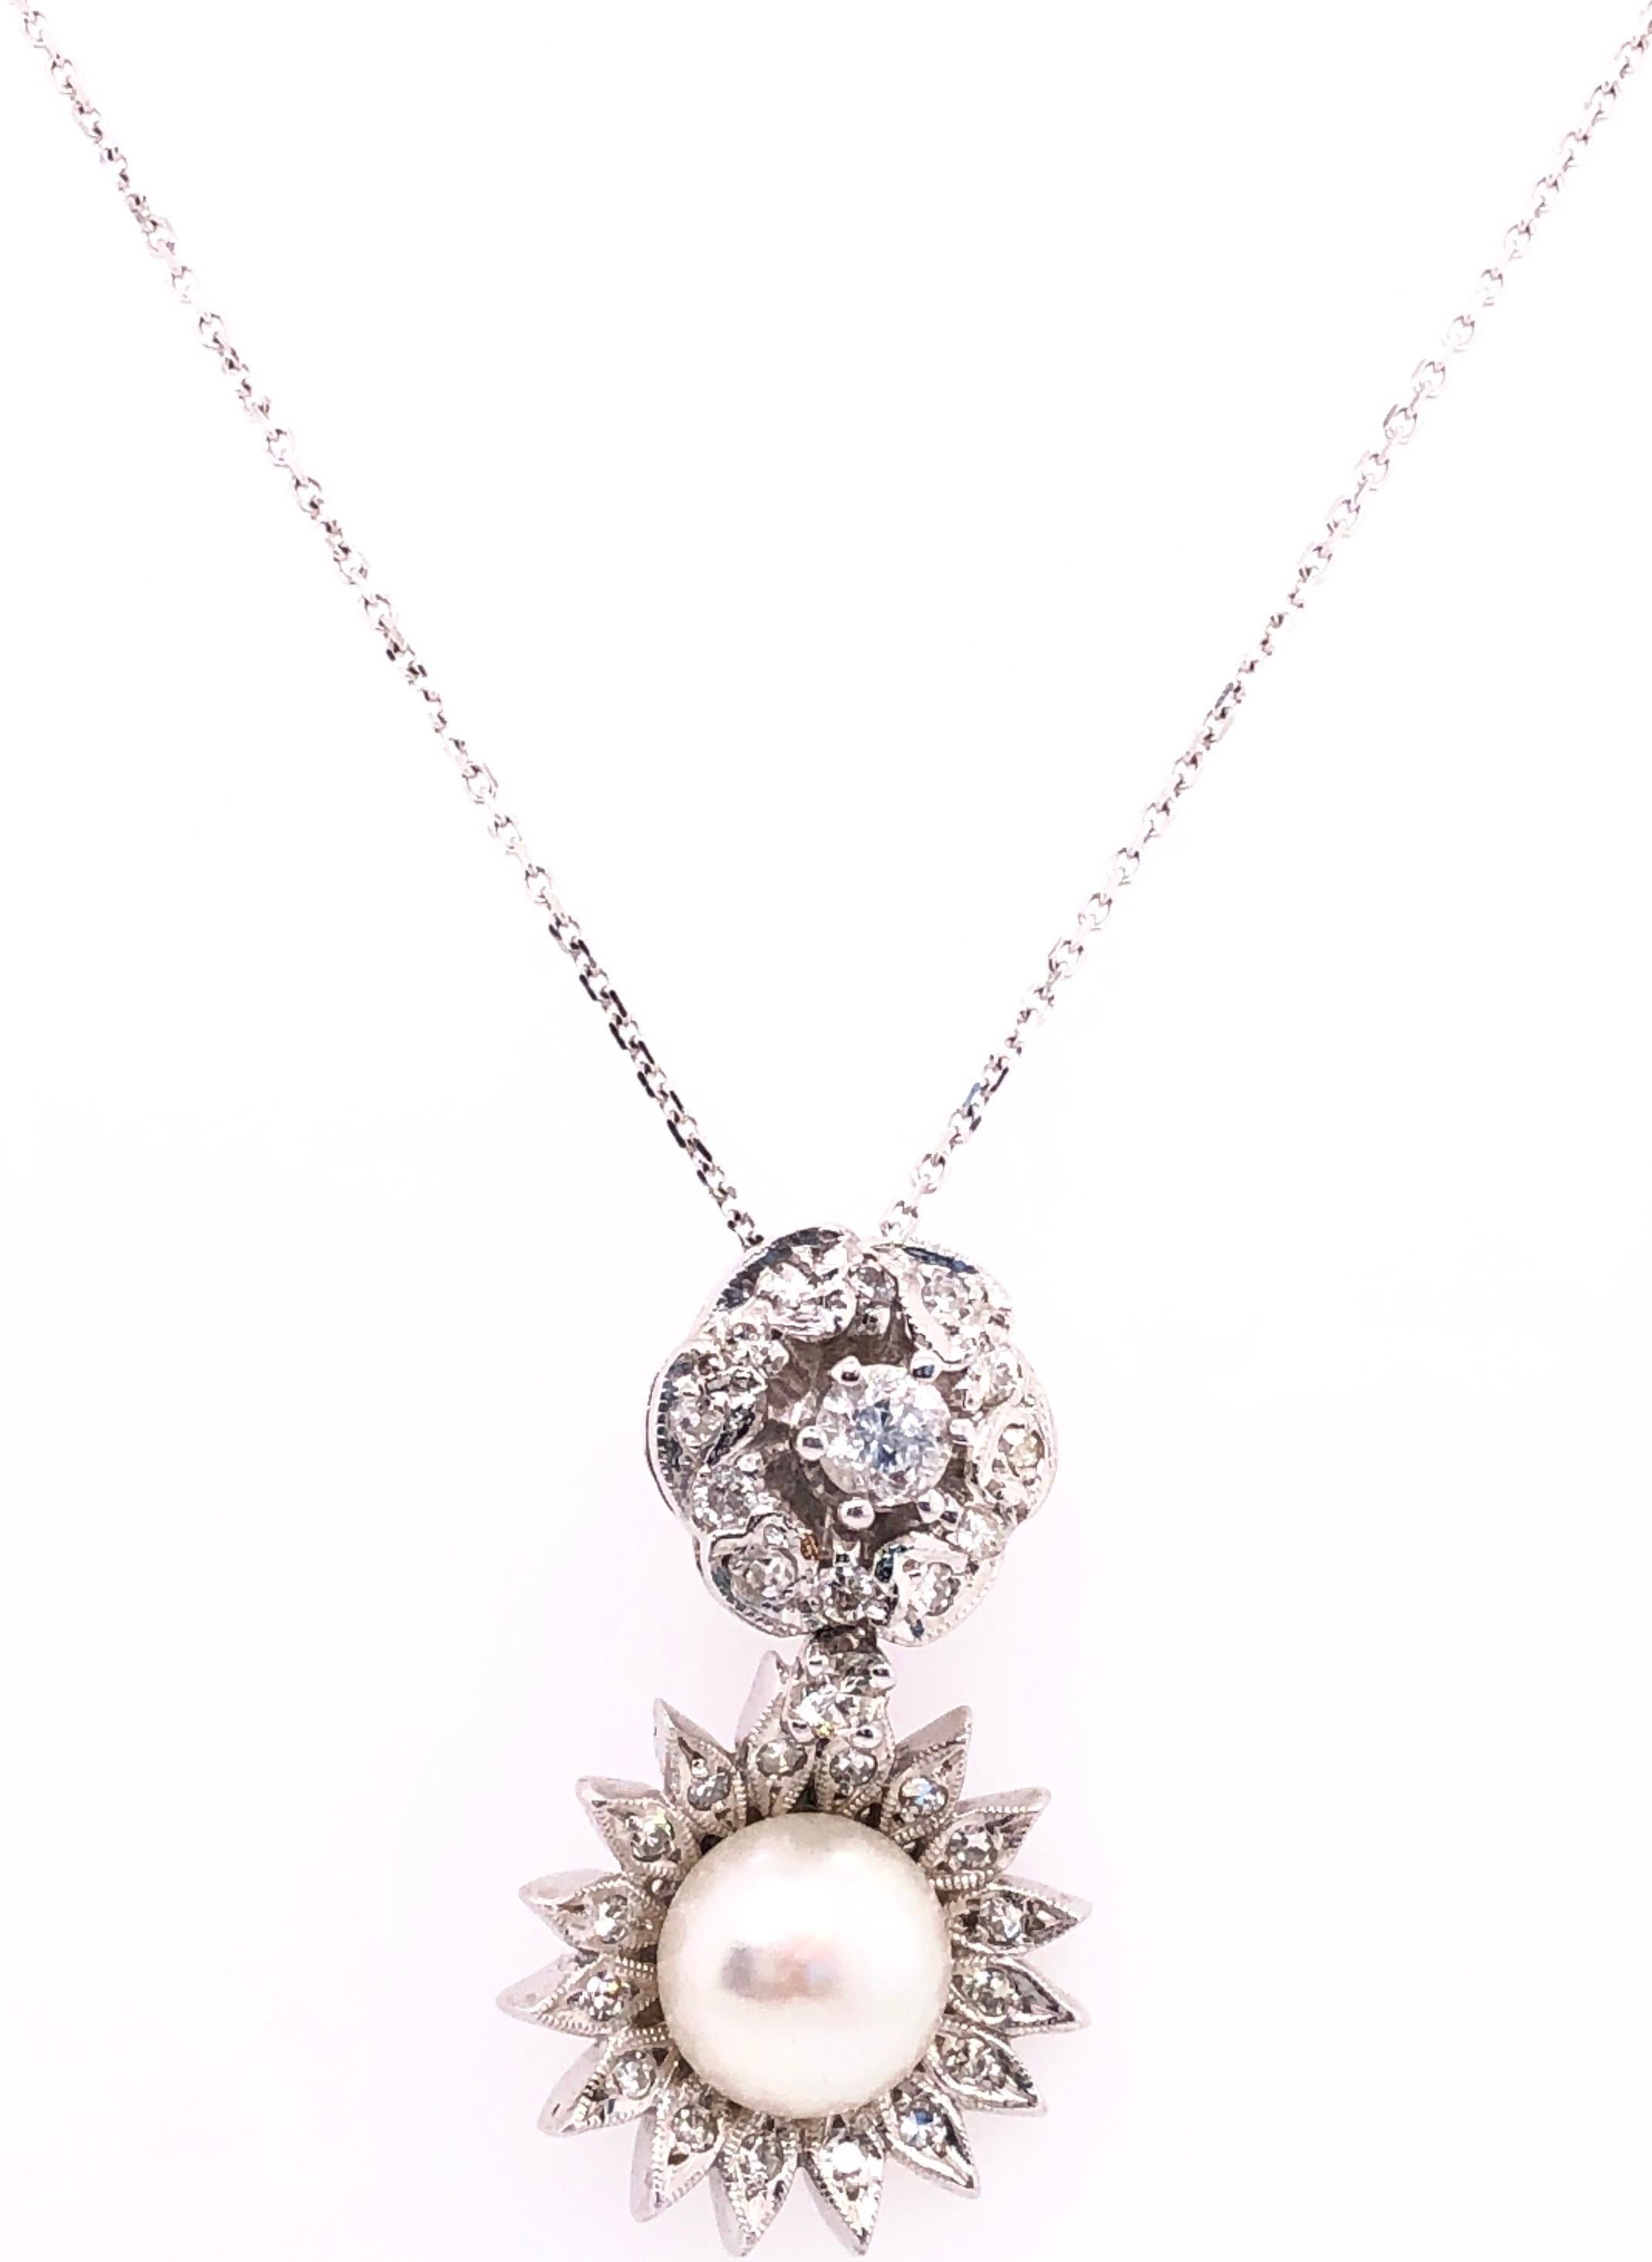 14 Karat White Gold 16 Inch Necklace with Diamond and Cultured Pearl Pendant.
0.85 Total Diamond Weight.
6.10 gram total weight.